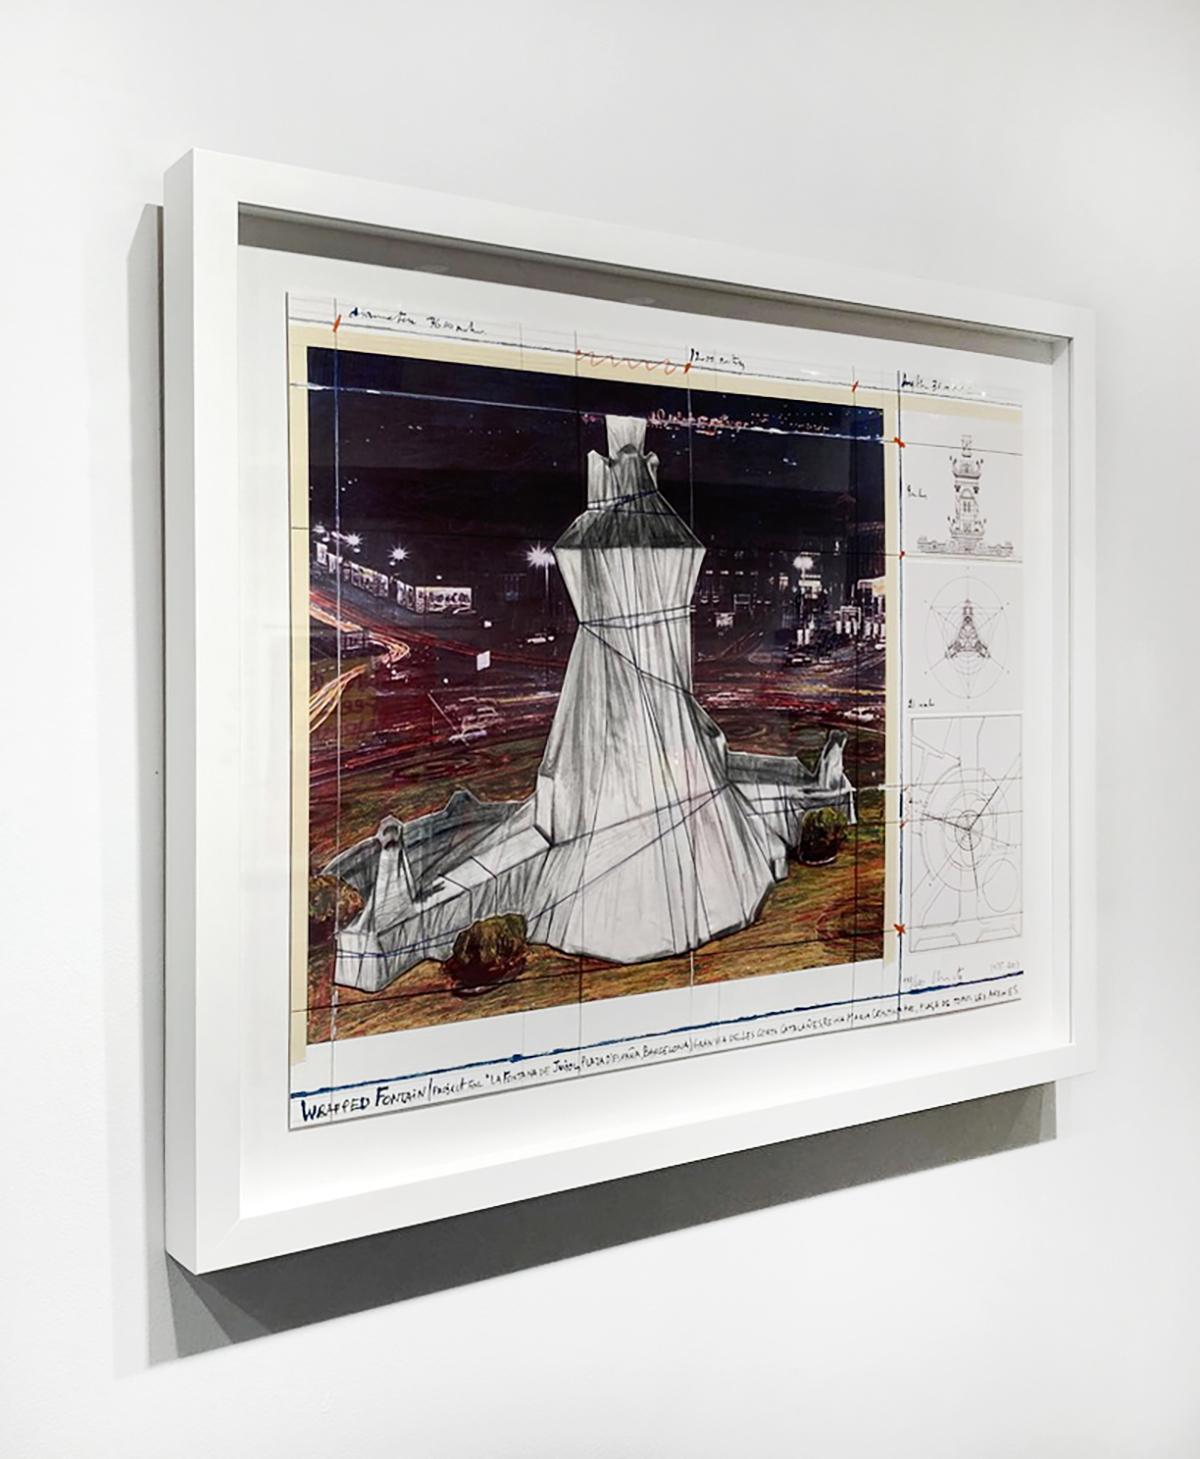 Wrapped Fountain - Conceptual Print by Christo and Jeanne-Claude